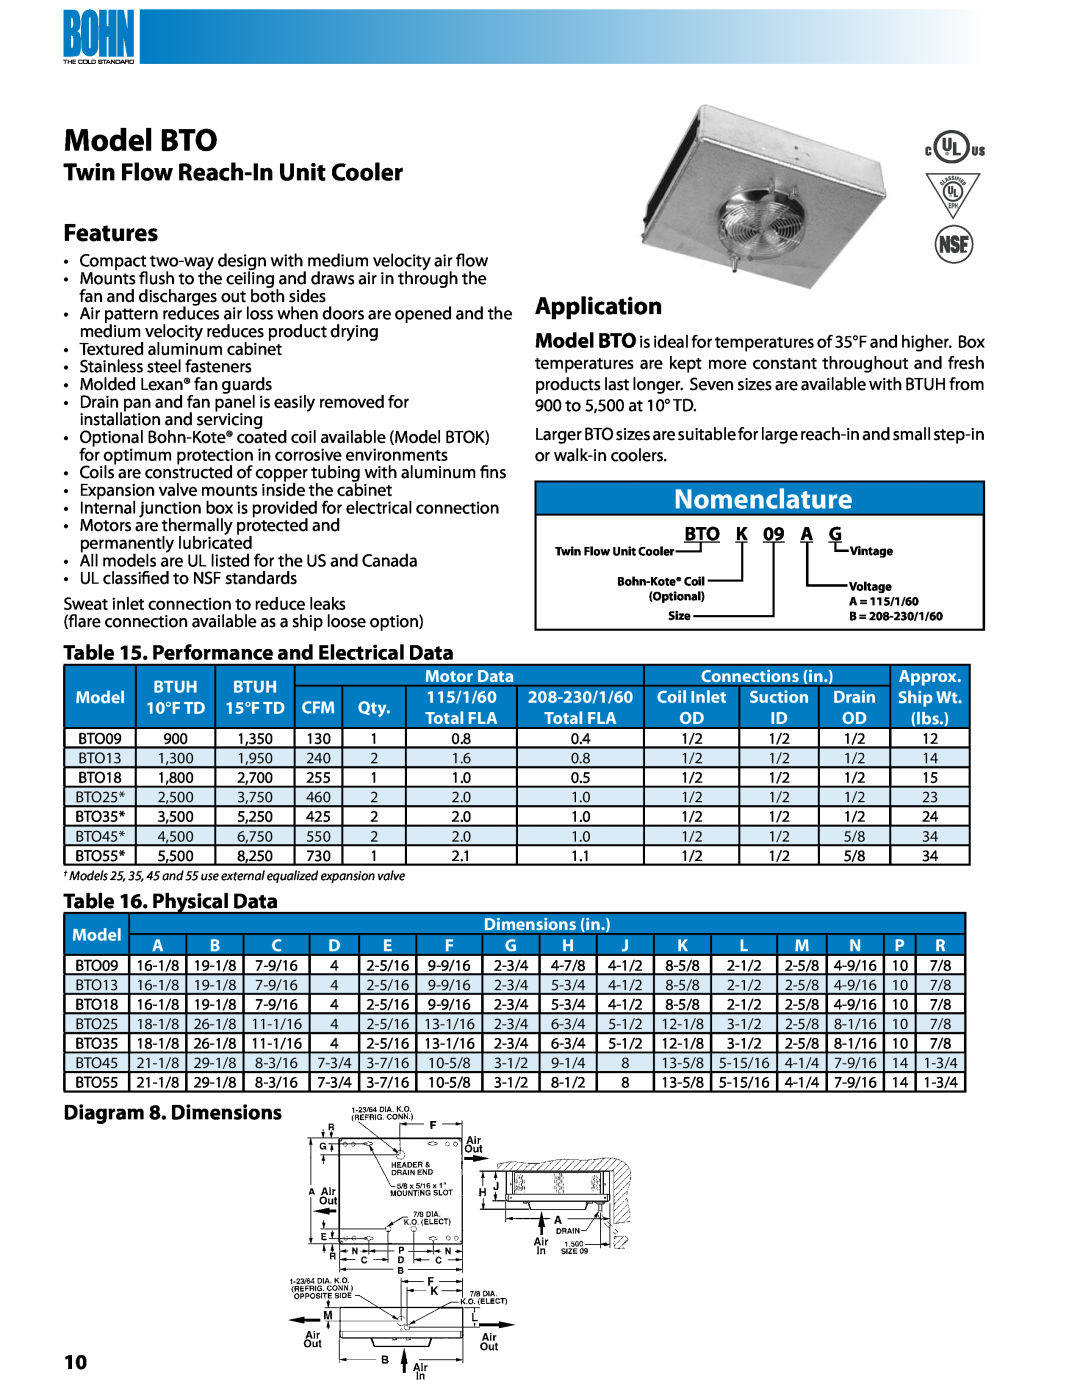 Heatcraft Refrigeration Products TL, TA Model BTO, Twin Flow Reach-InUnit Cooler Features, Performance and Electrical Data 